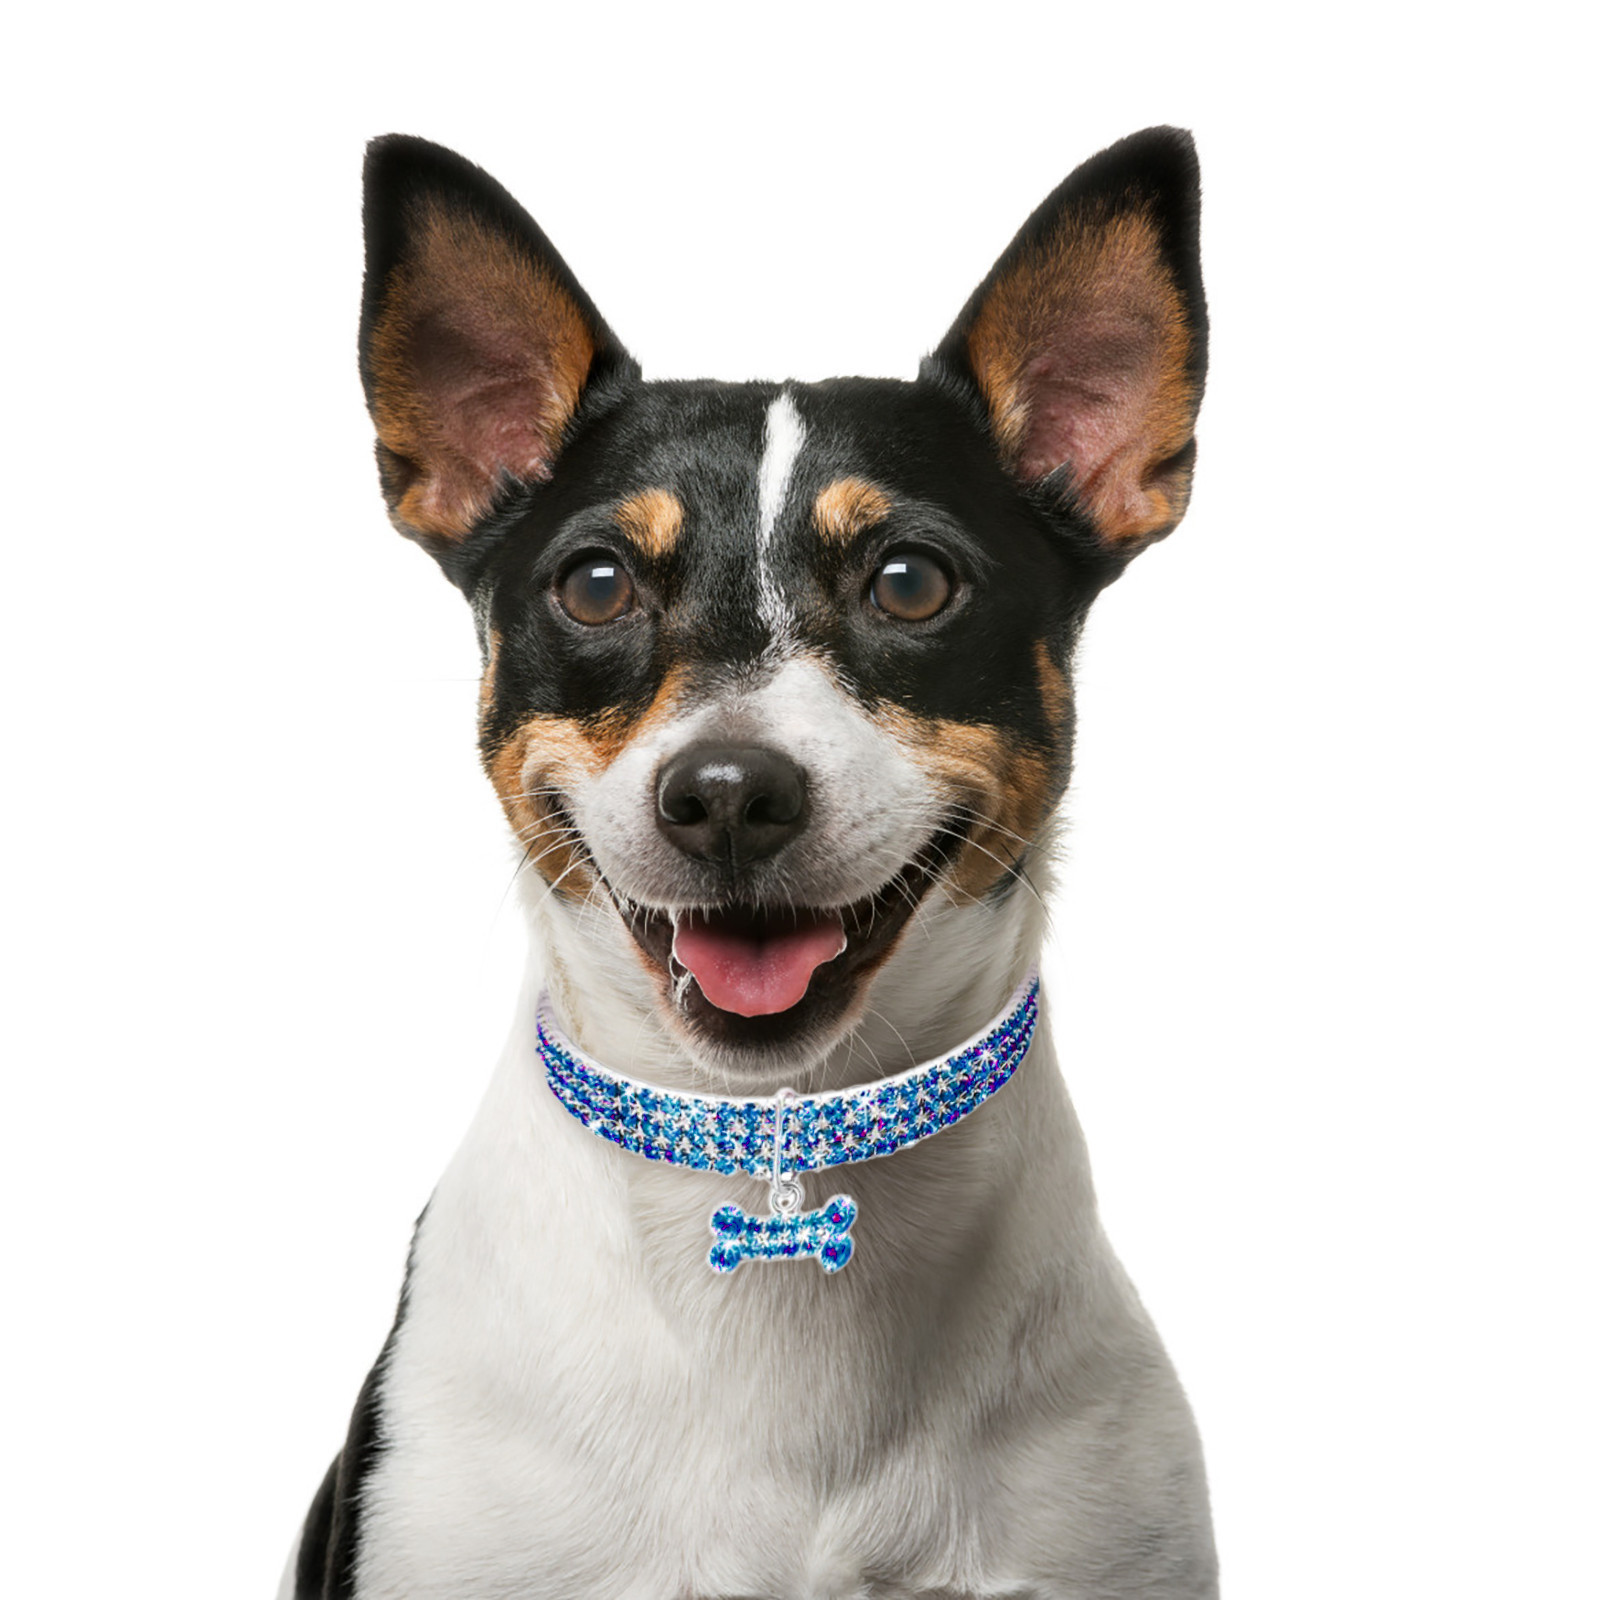 J Necklace for Boys Cute Mini Pet Dog Bling Rhinestone Chocker Collars Fancy Dog Necklace Ashes Necklace - image 2 of 7